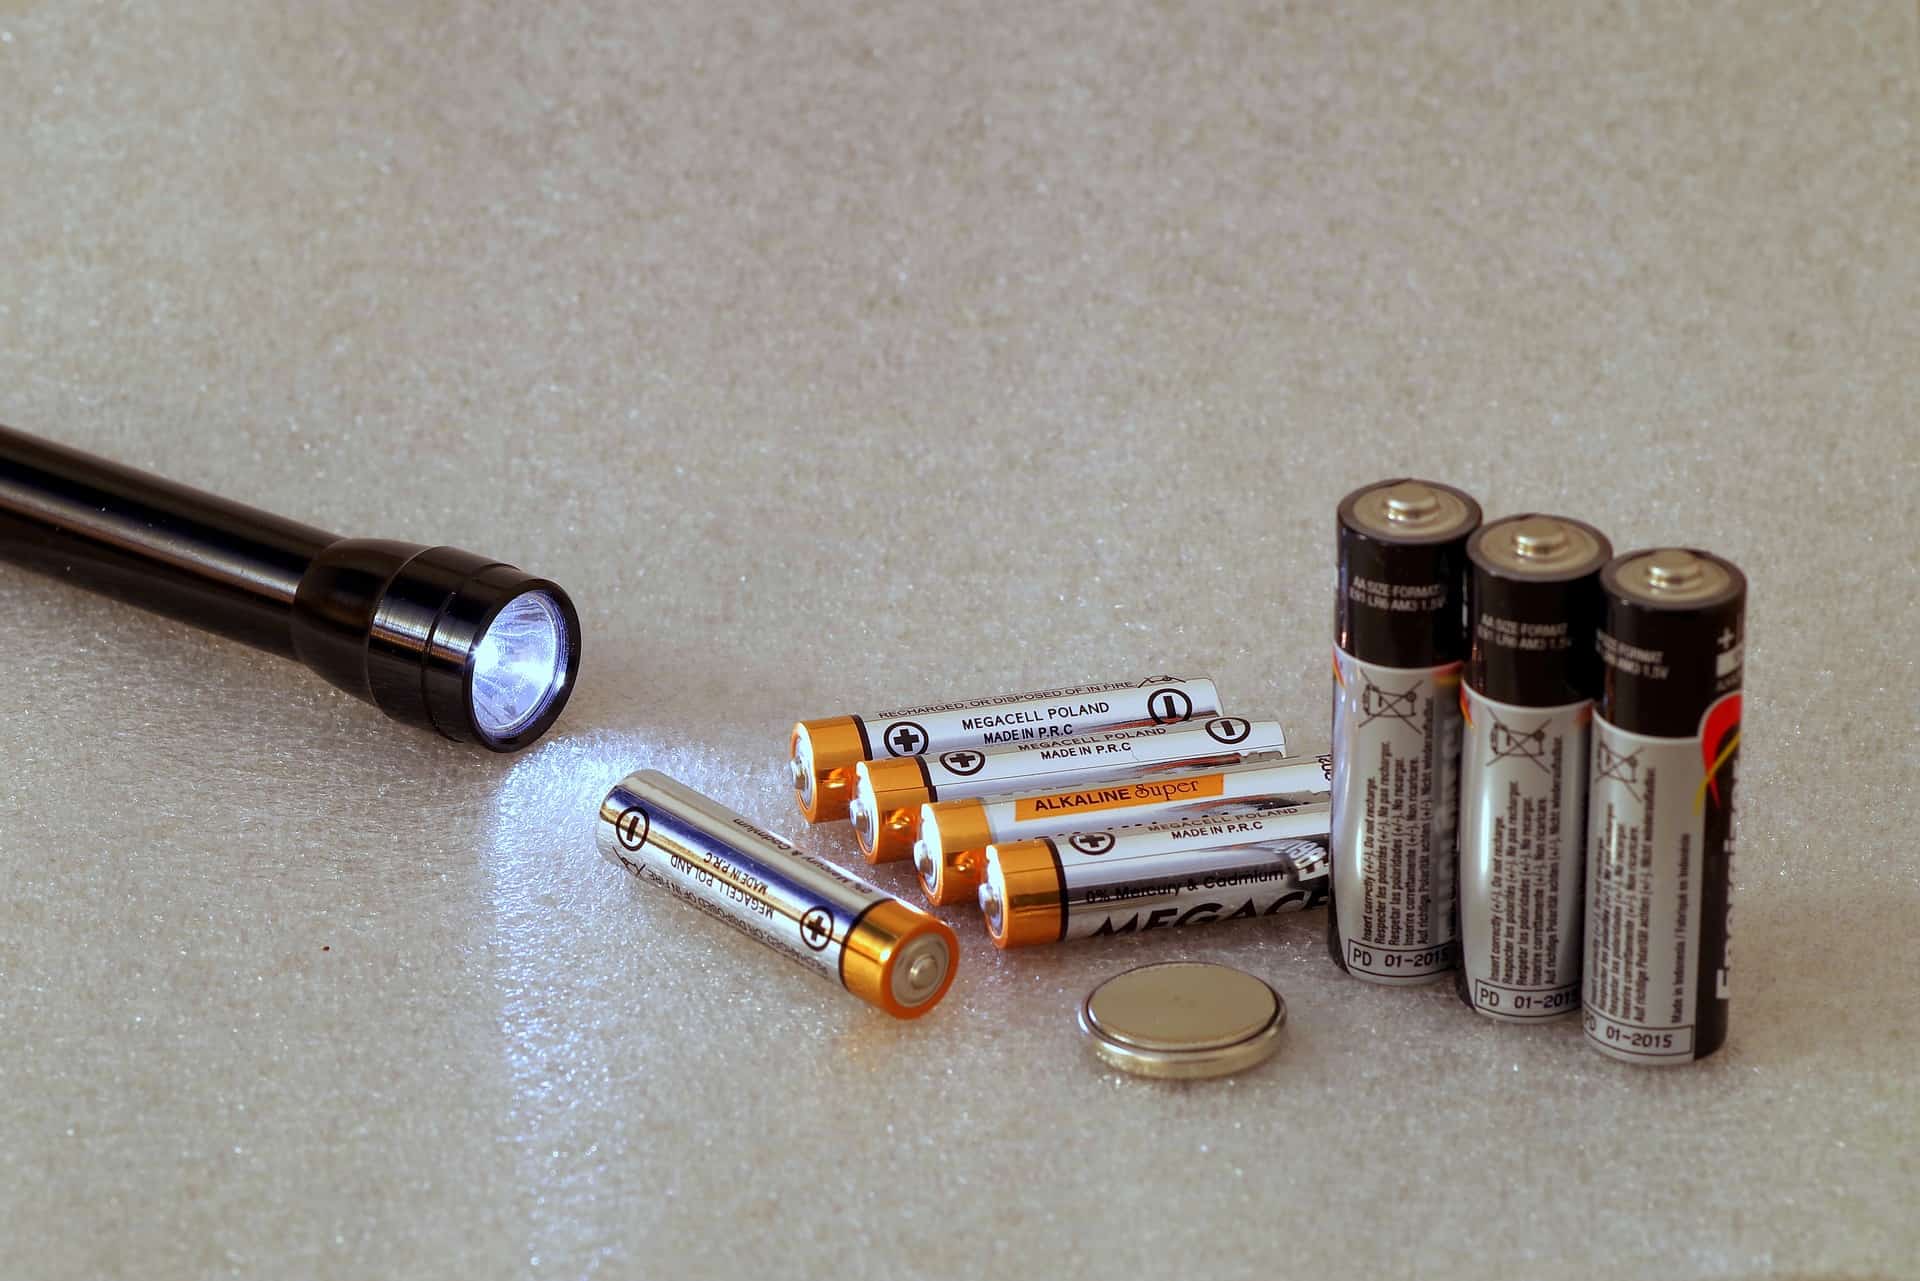 Family Survival Kit - Includes multiple Flashlights and replacement batteries